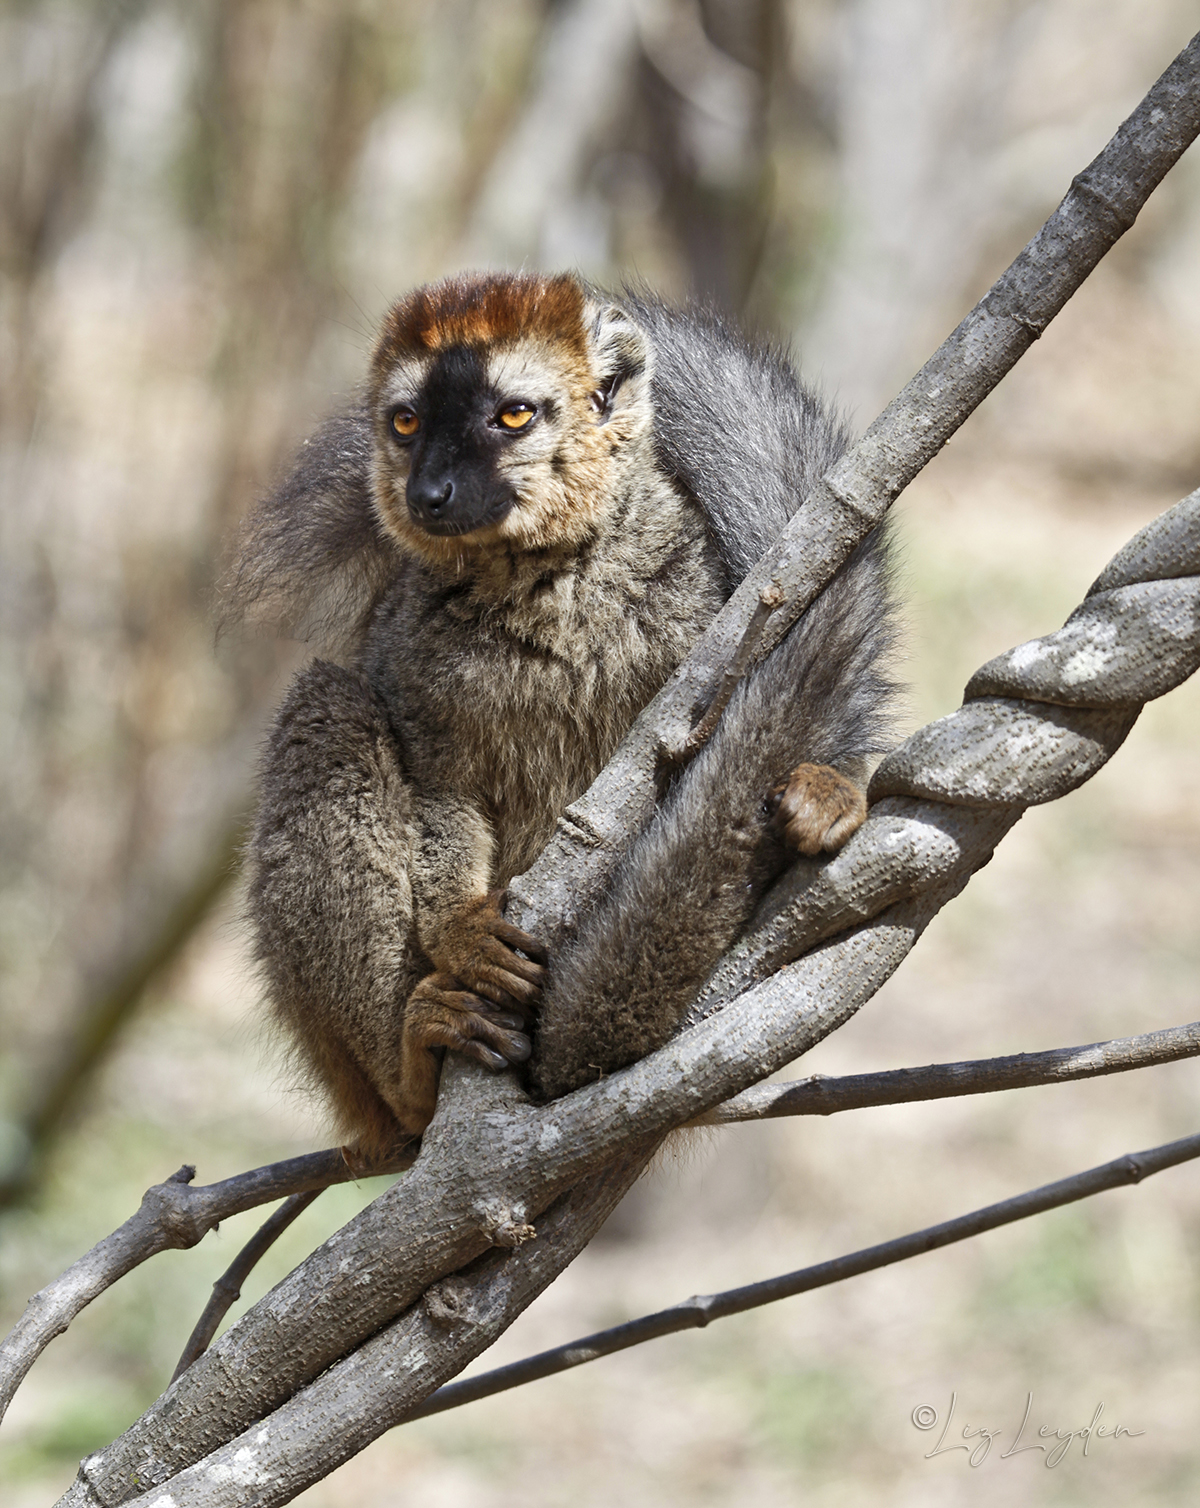 Red-fronted lemur sitting on a branch